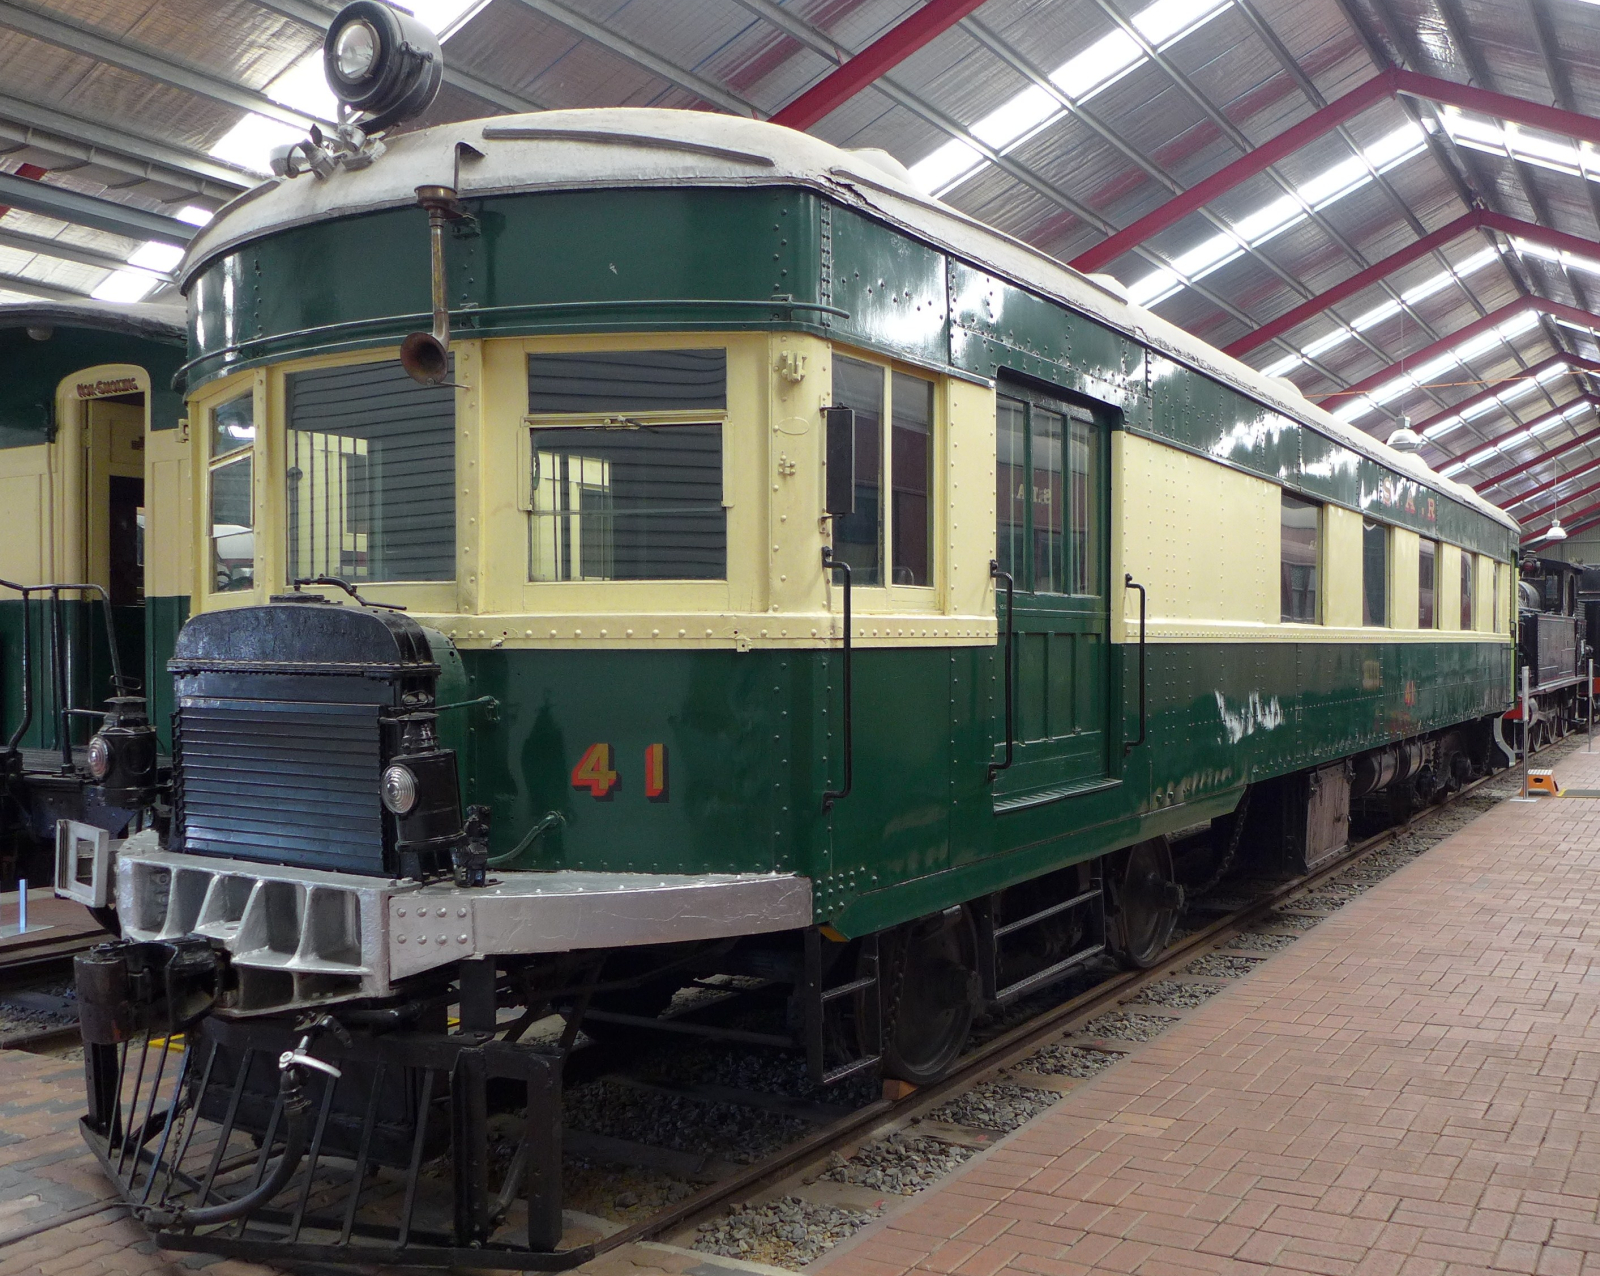 No. 41 (Model 55) at the National Railway Museum, Port Adelaide